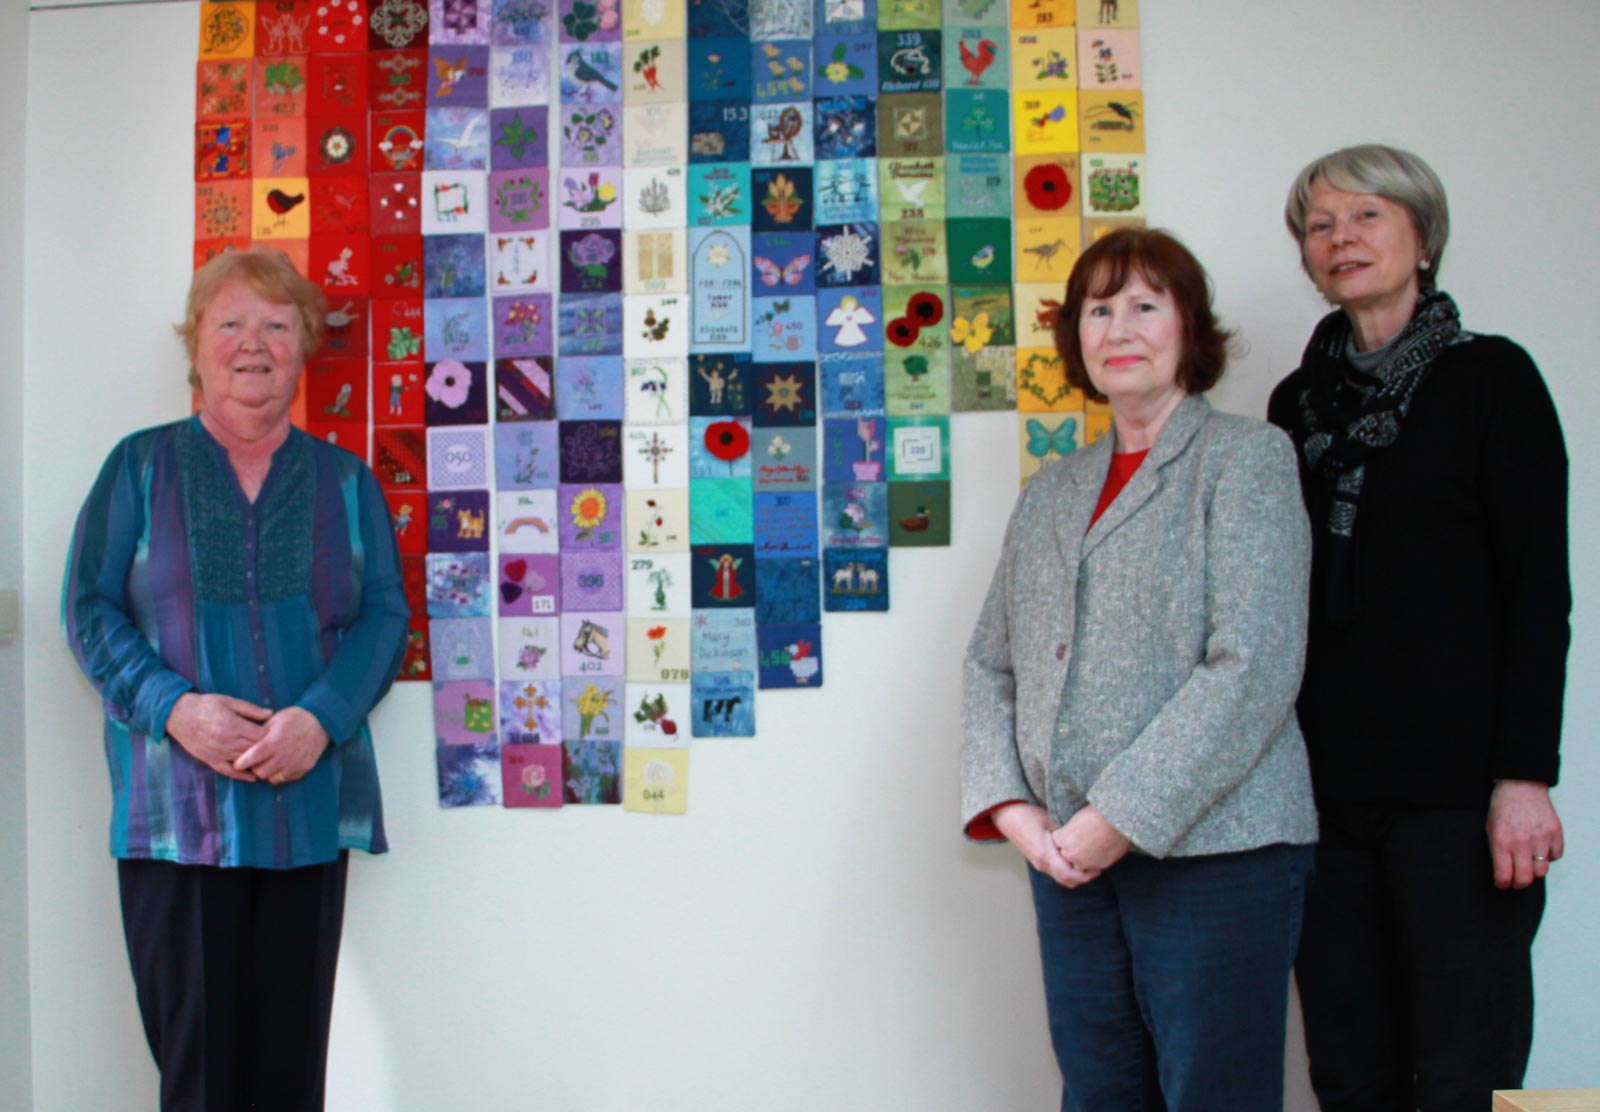 Textile artist Maureen Fackrell of Knaresborough, Washburn Stitcher Liz Carnell of Harrogate and project leader Sally Robinson of Fewston, with the Fewston Assemblage Project panel